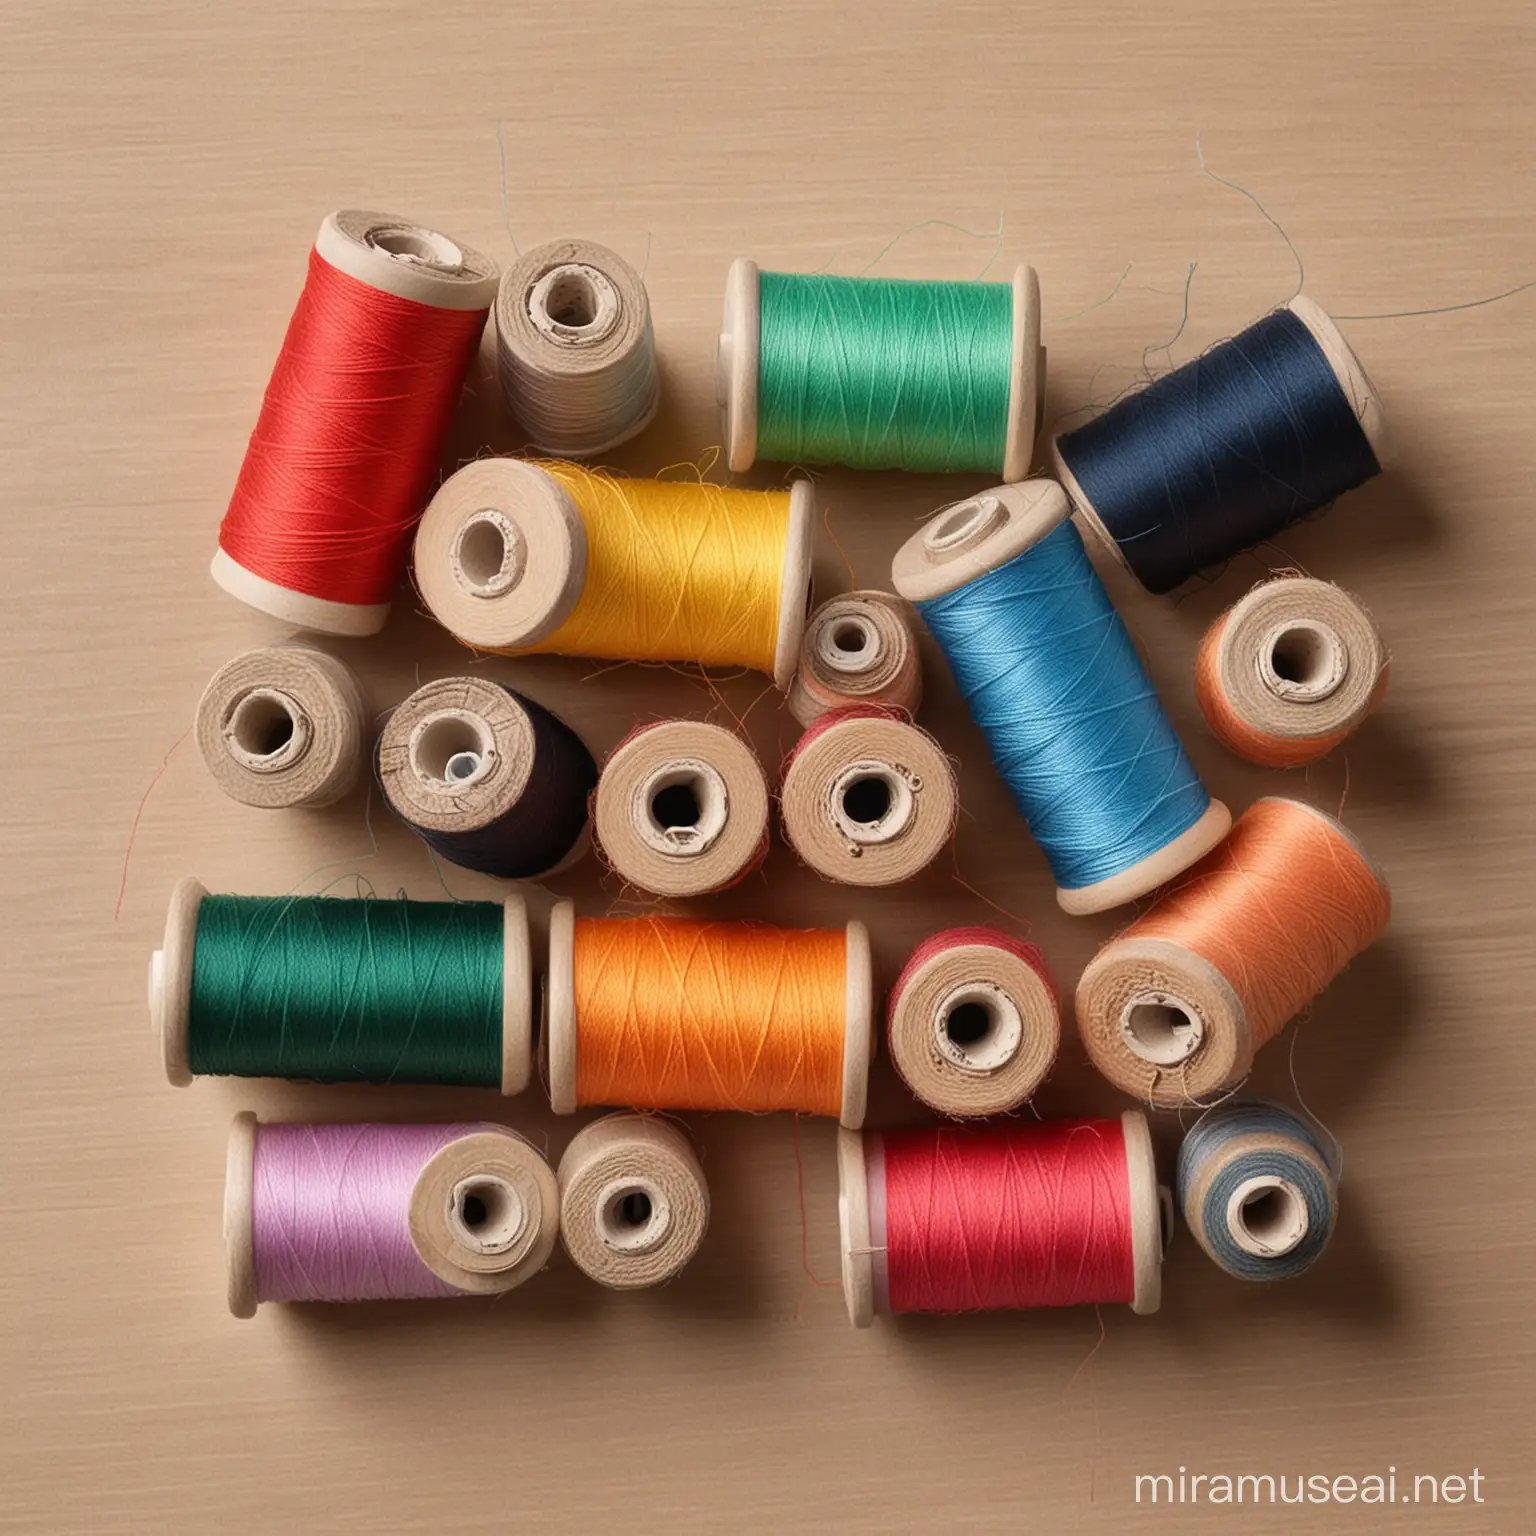 Vibrant Spools of Colored Thread on a Wooden Table